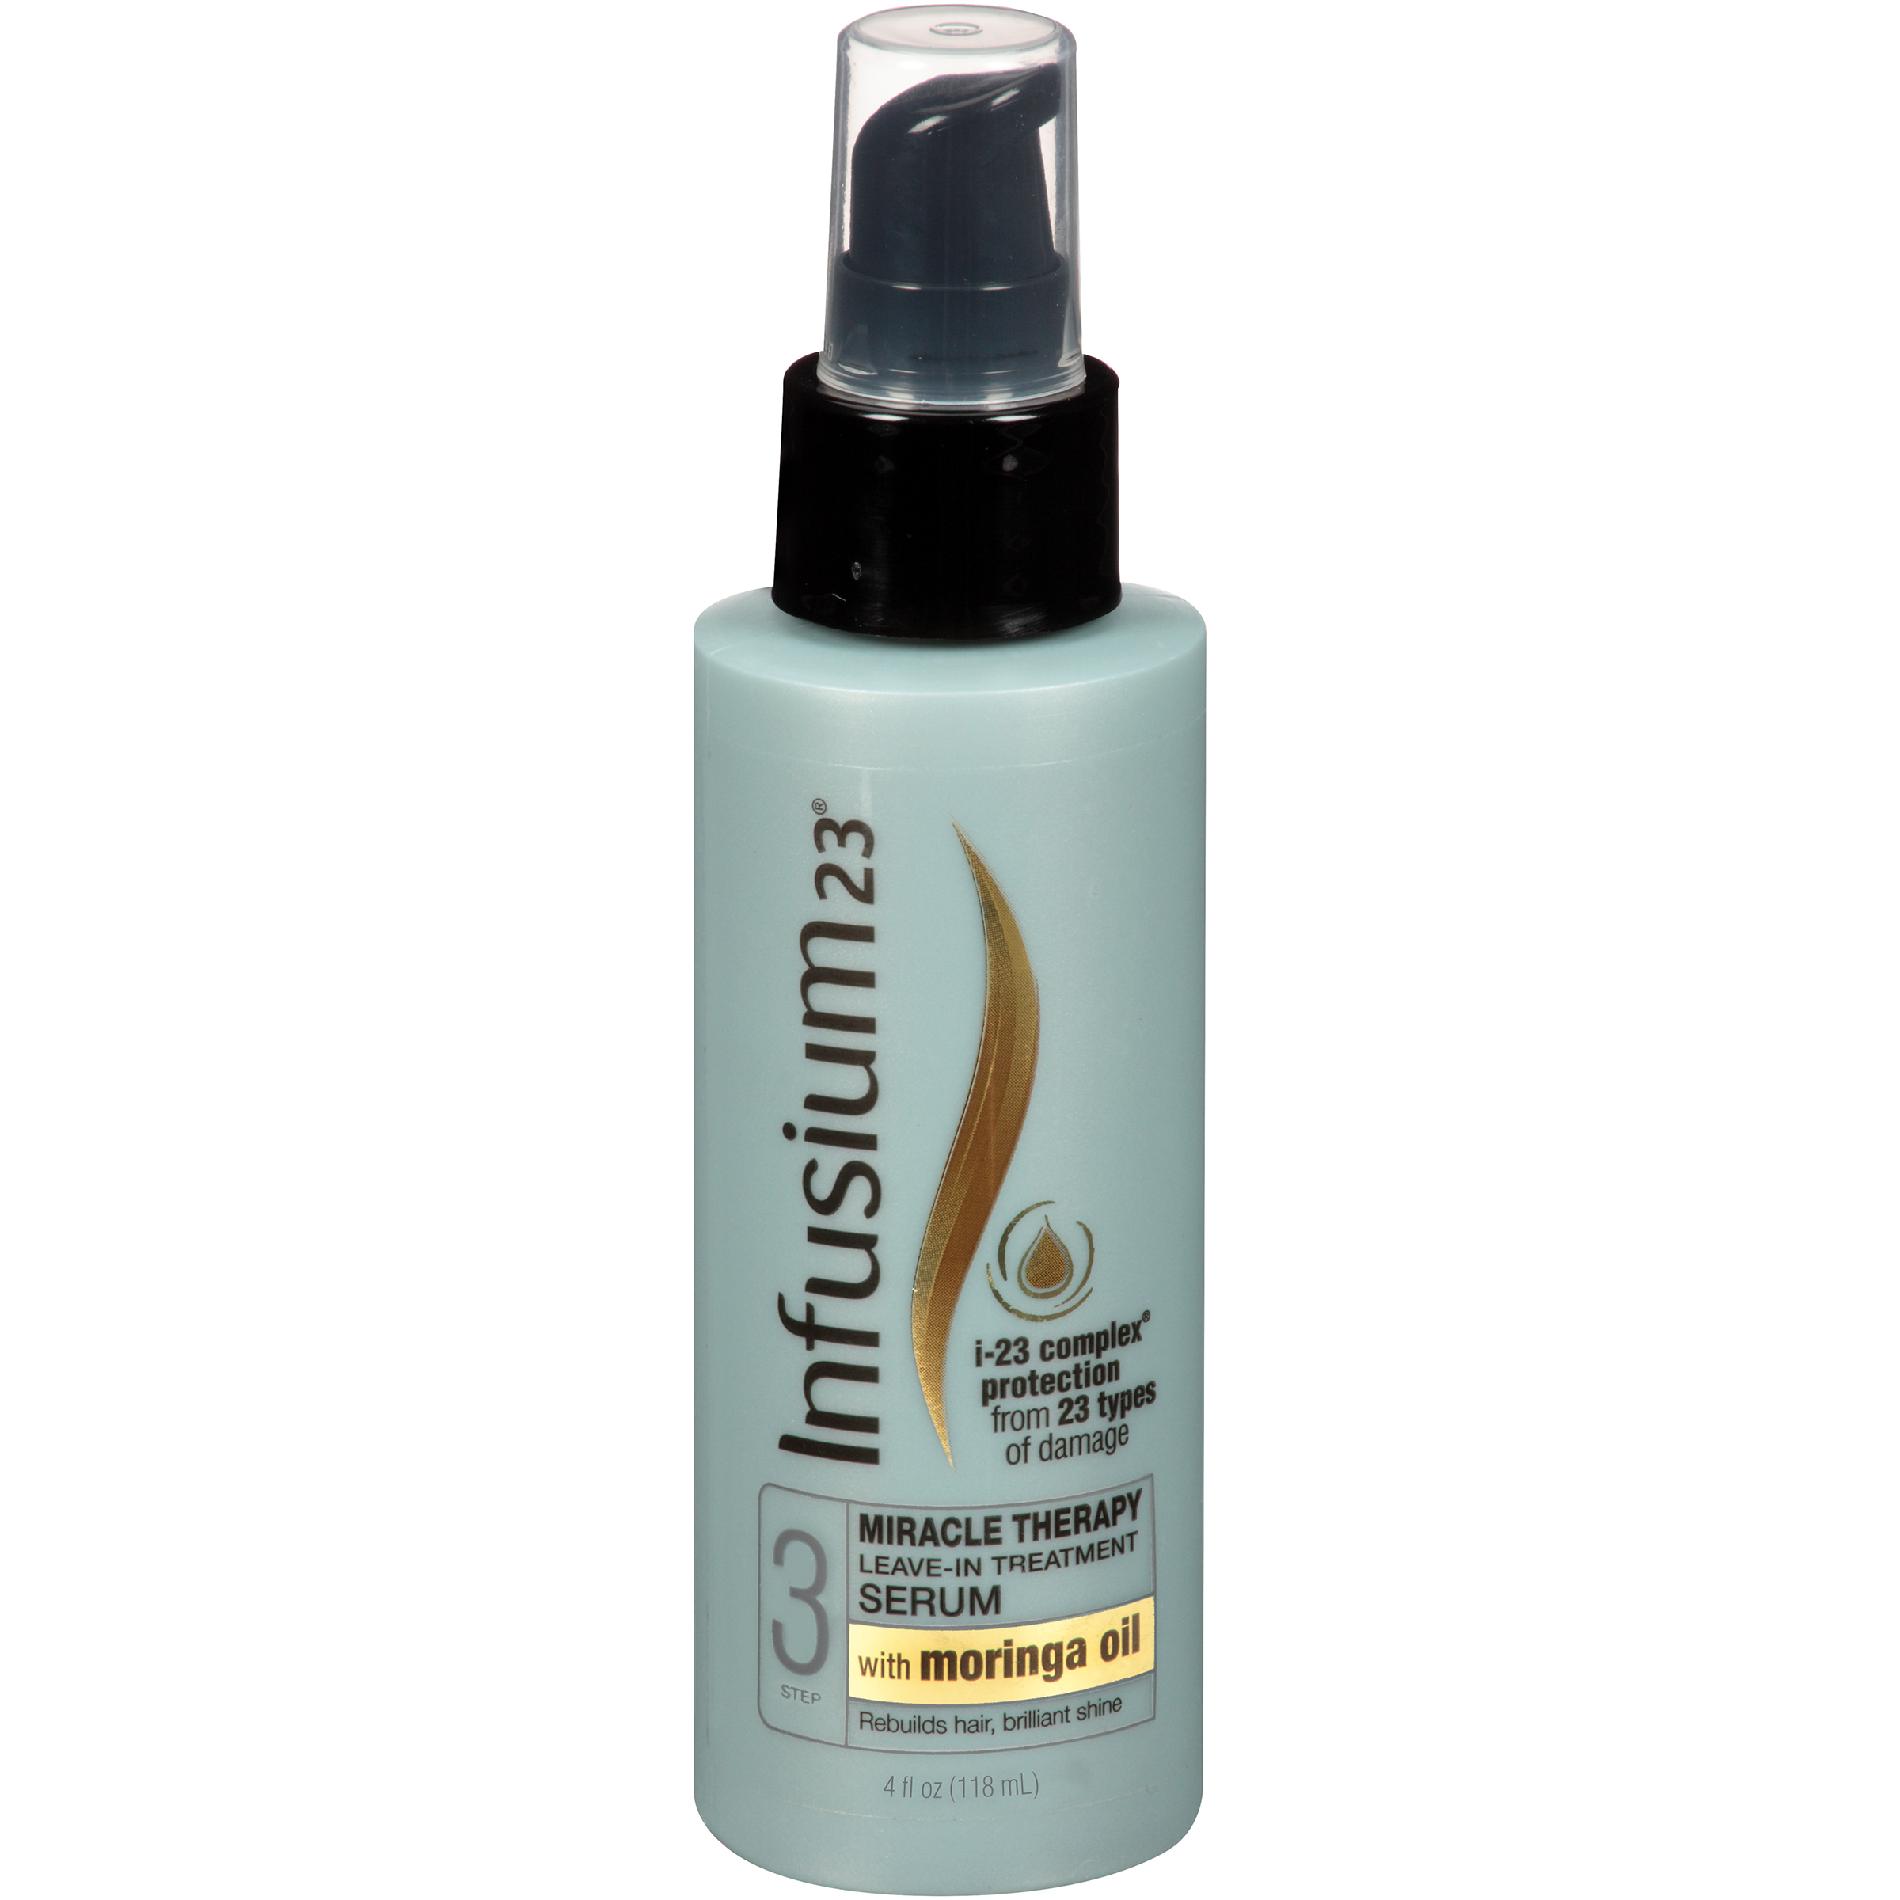 UPC 827755003144 product image for Infusium Miracle Therapy Leave-In Treatment Serum with Moringa Oil, 8.0 fl oz | upcitemdb.com